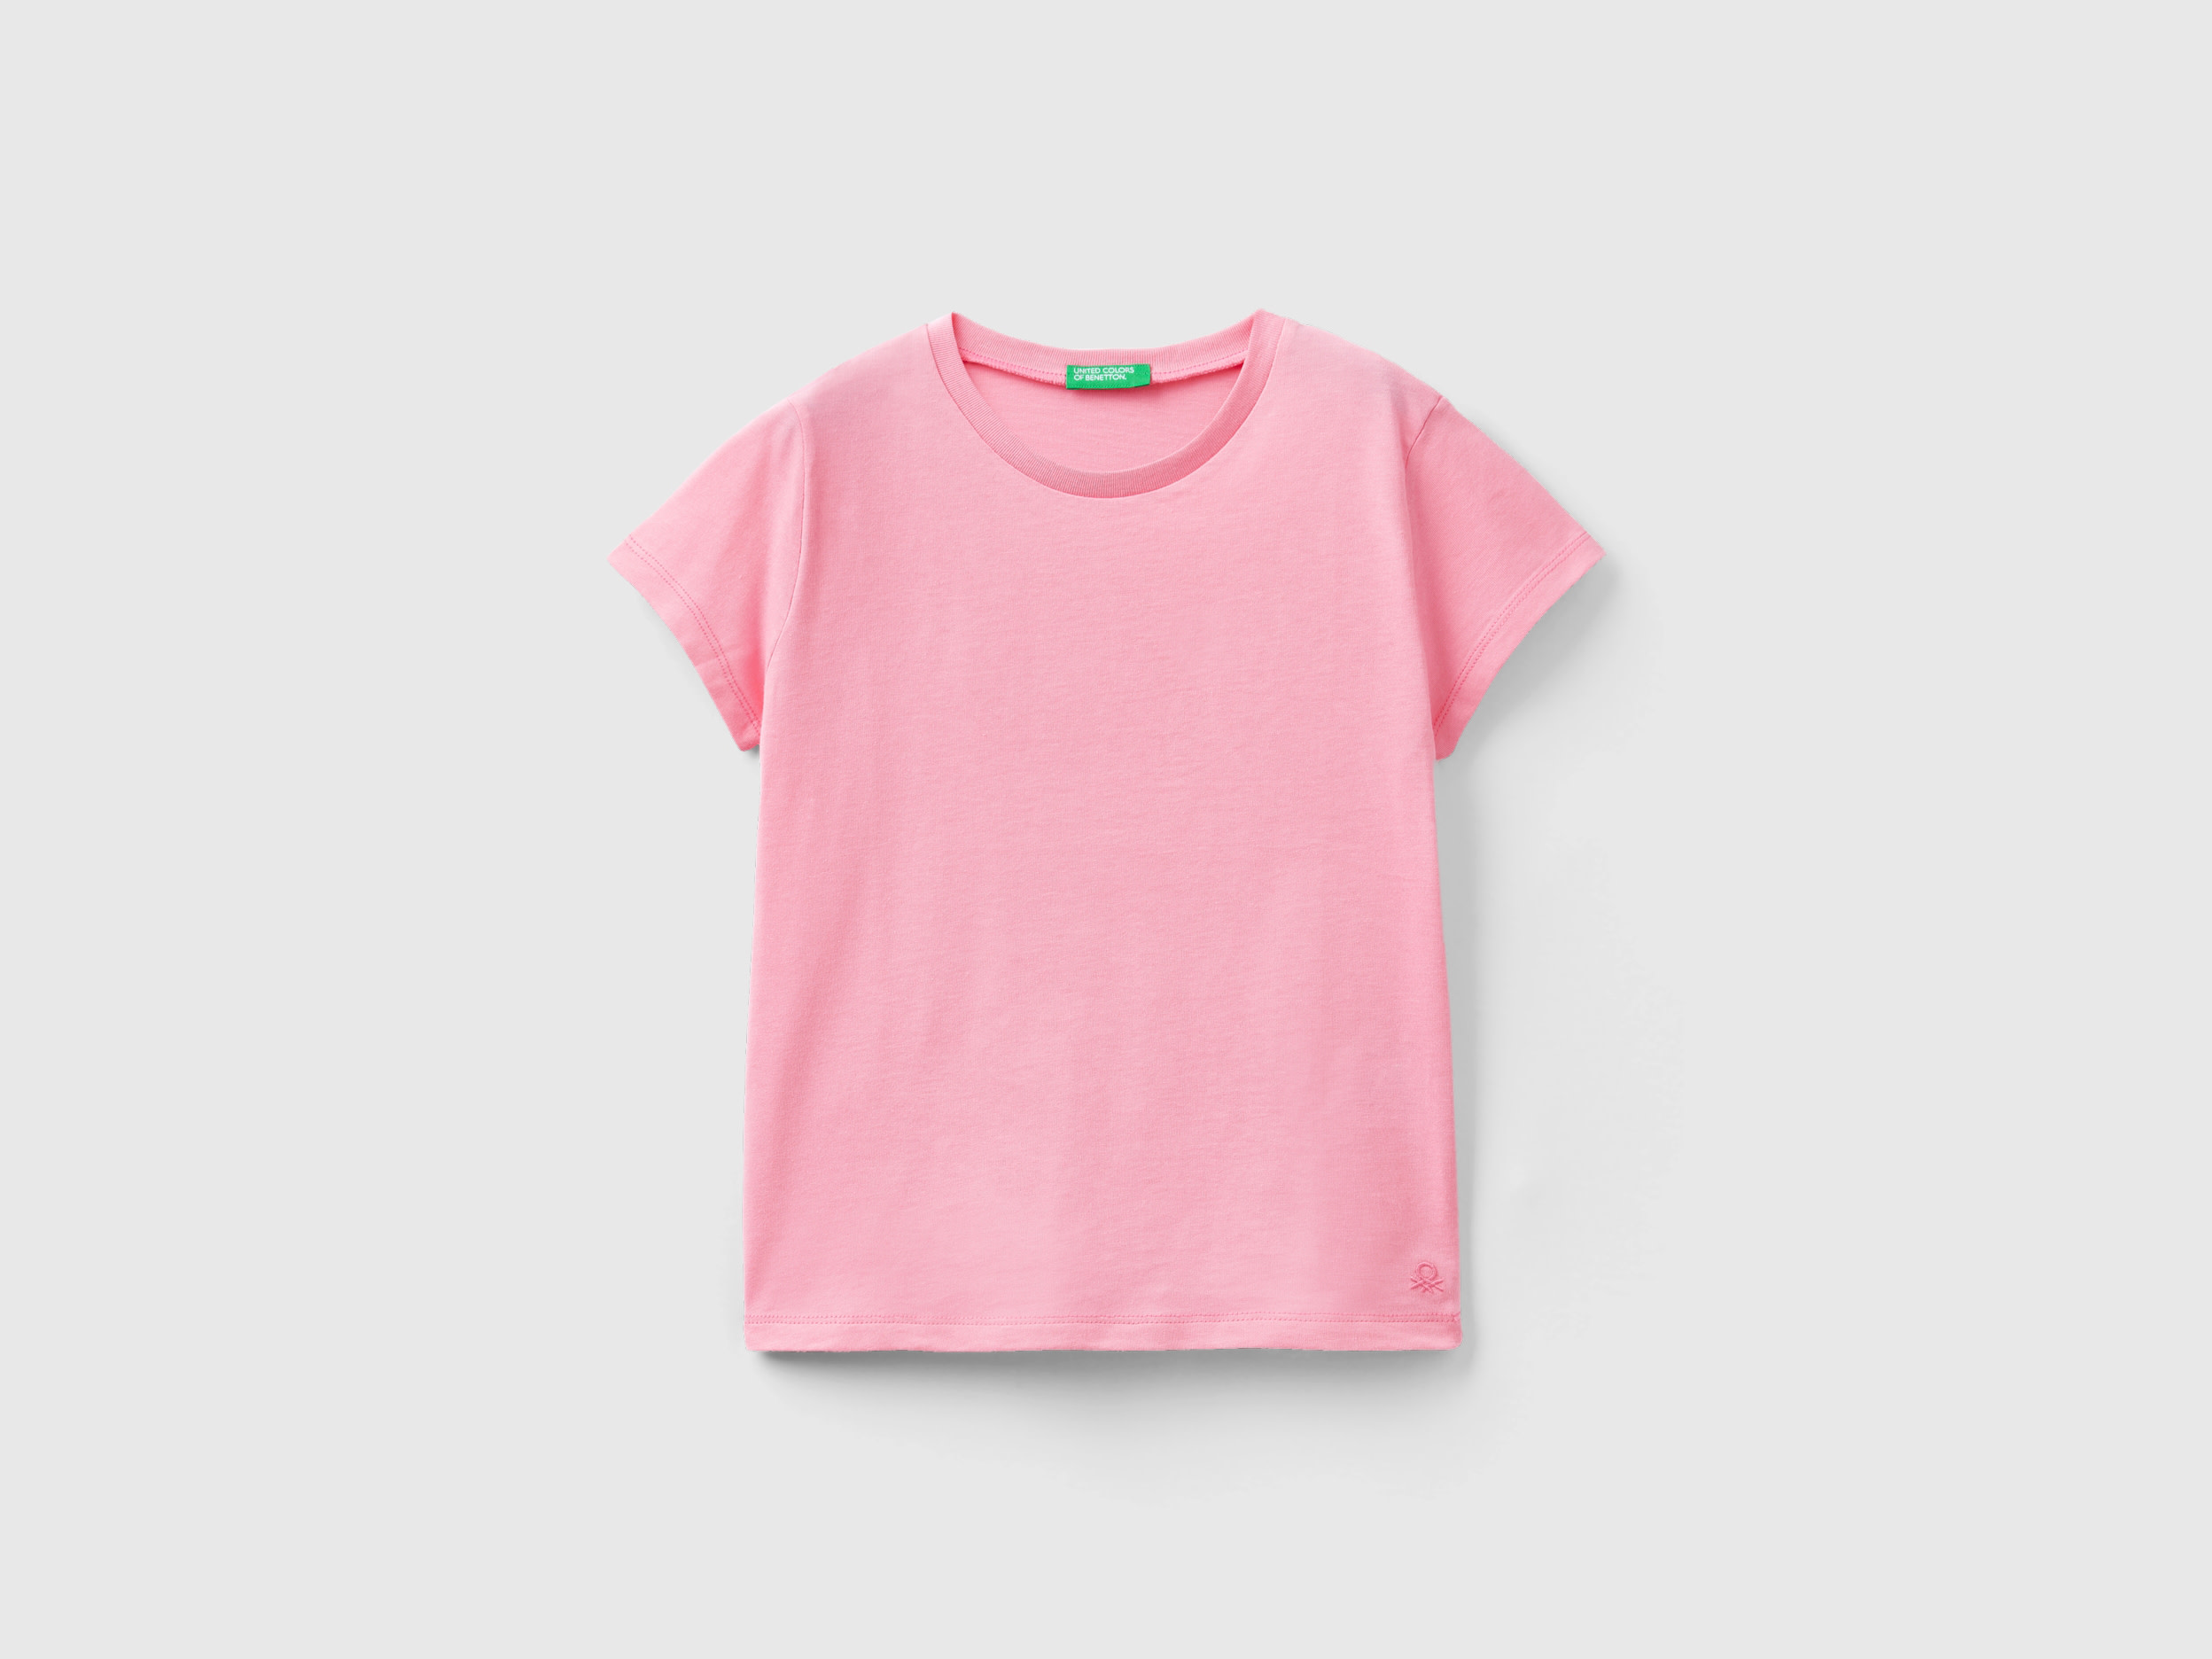 Image of Benetton, T-shirt In Pure Organic Cotton, size XL, Pink, Kids